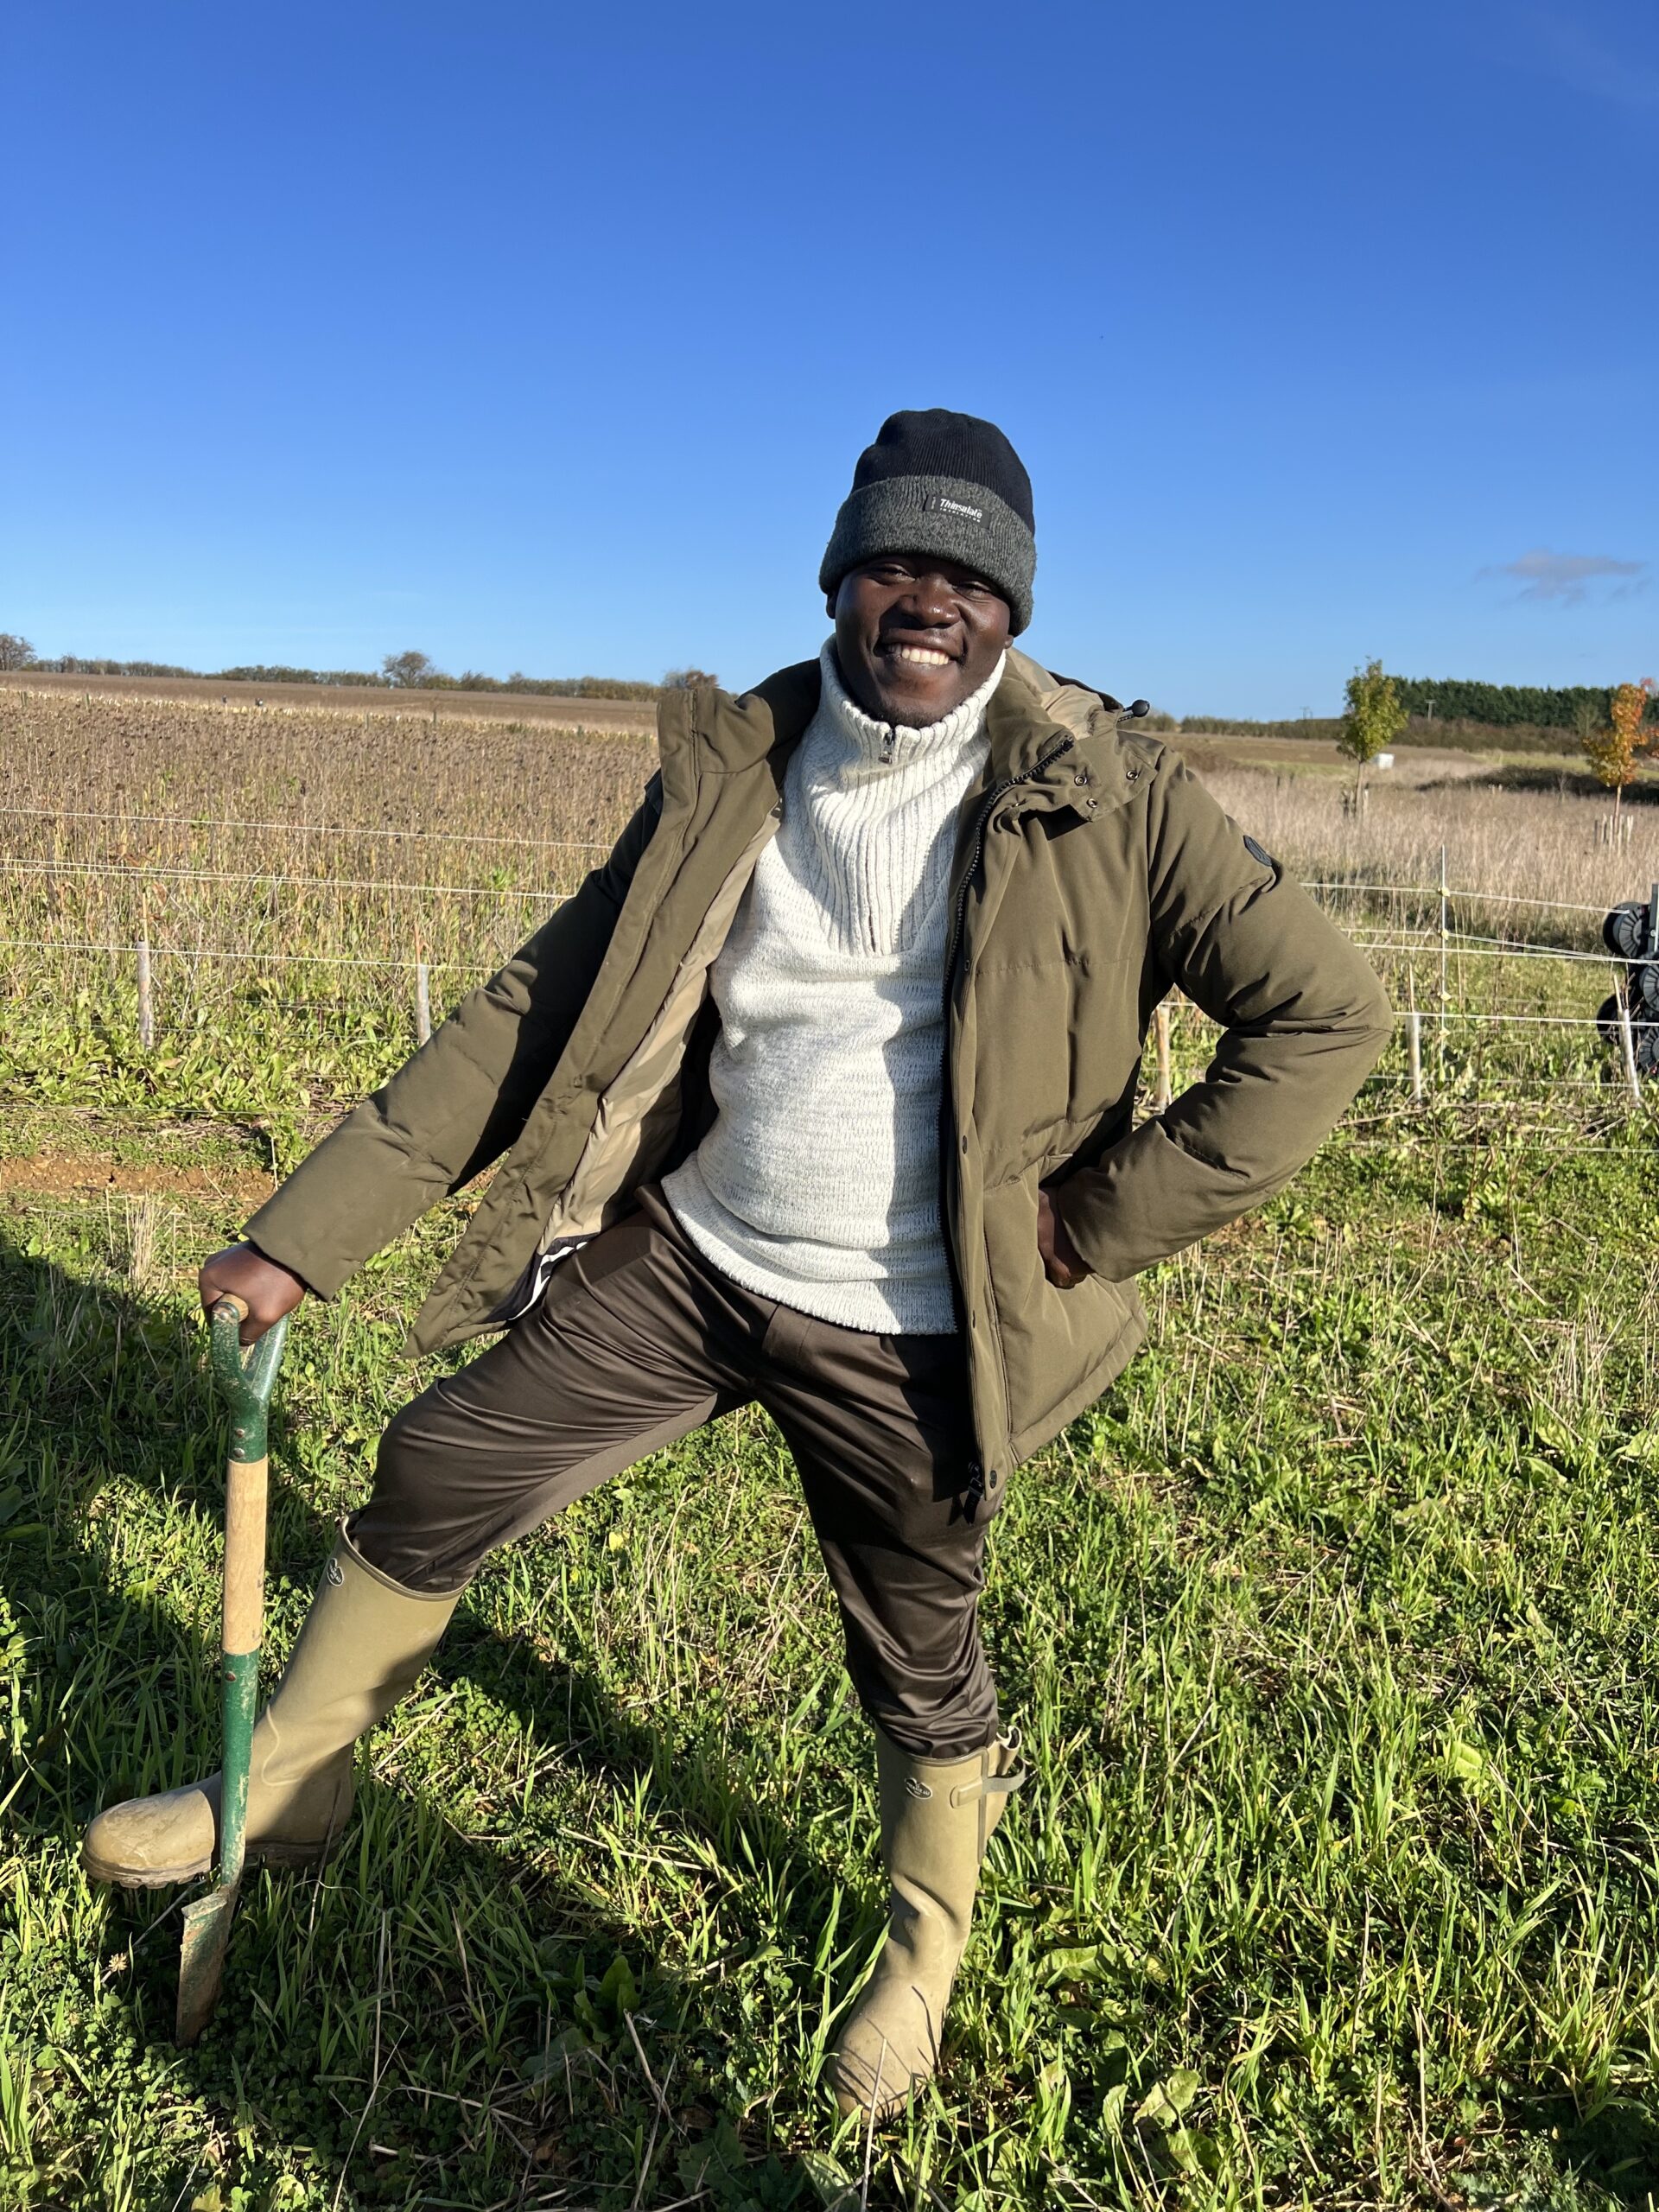 Jairus Guëdjo from Cameroon visits FarmED’s Honeydale Farm – a regenerative agriculture demonstration farm and learning centre in the heart of the Cotswolds. Jairus is an rural development and fisheries engineer, a father of three, and the Activities Coordinator for CERAF-Nord, an NGO helping local communities protect and restore land in the Benoué National Park in Northern Cameroon.